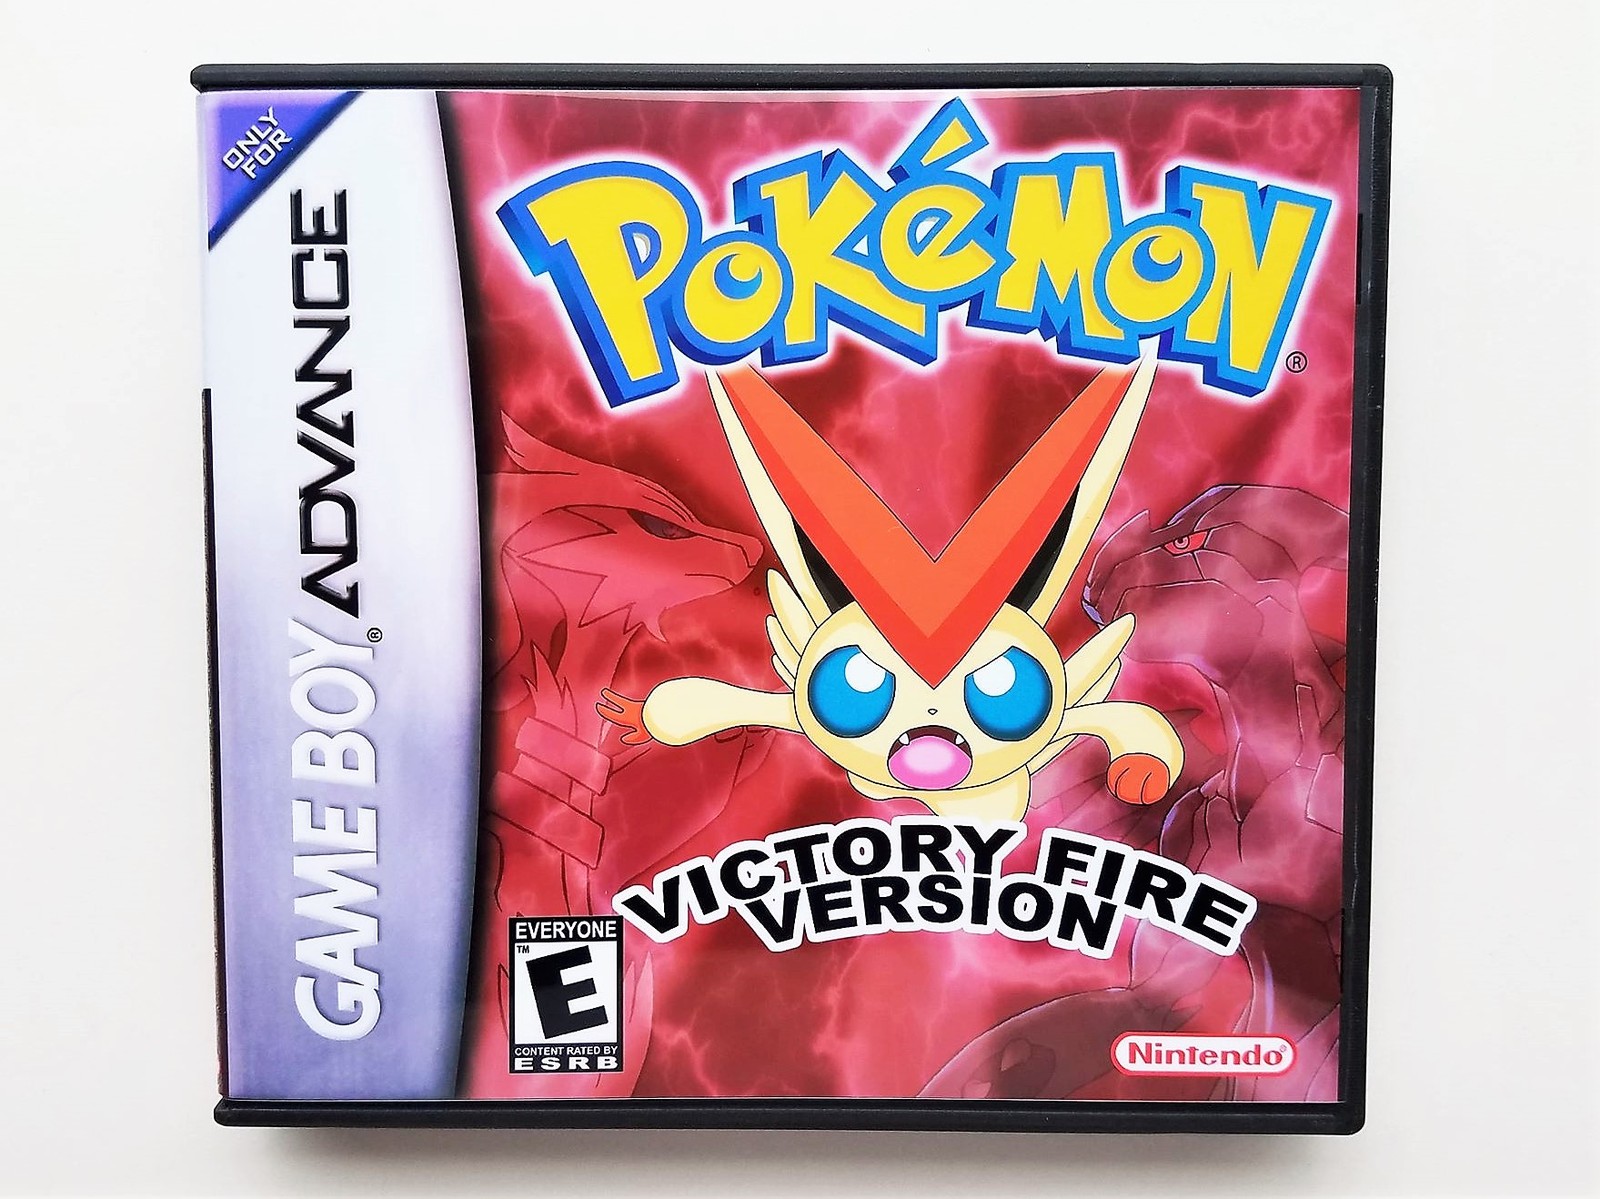 Pokemon Victory Fire Game / Case - Gameboy Advance (GBA) USA Seller